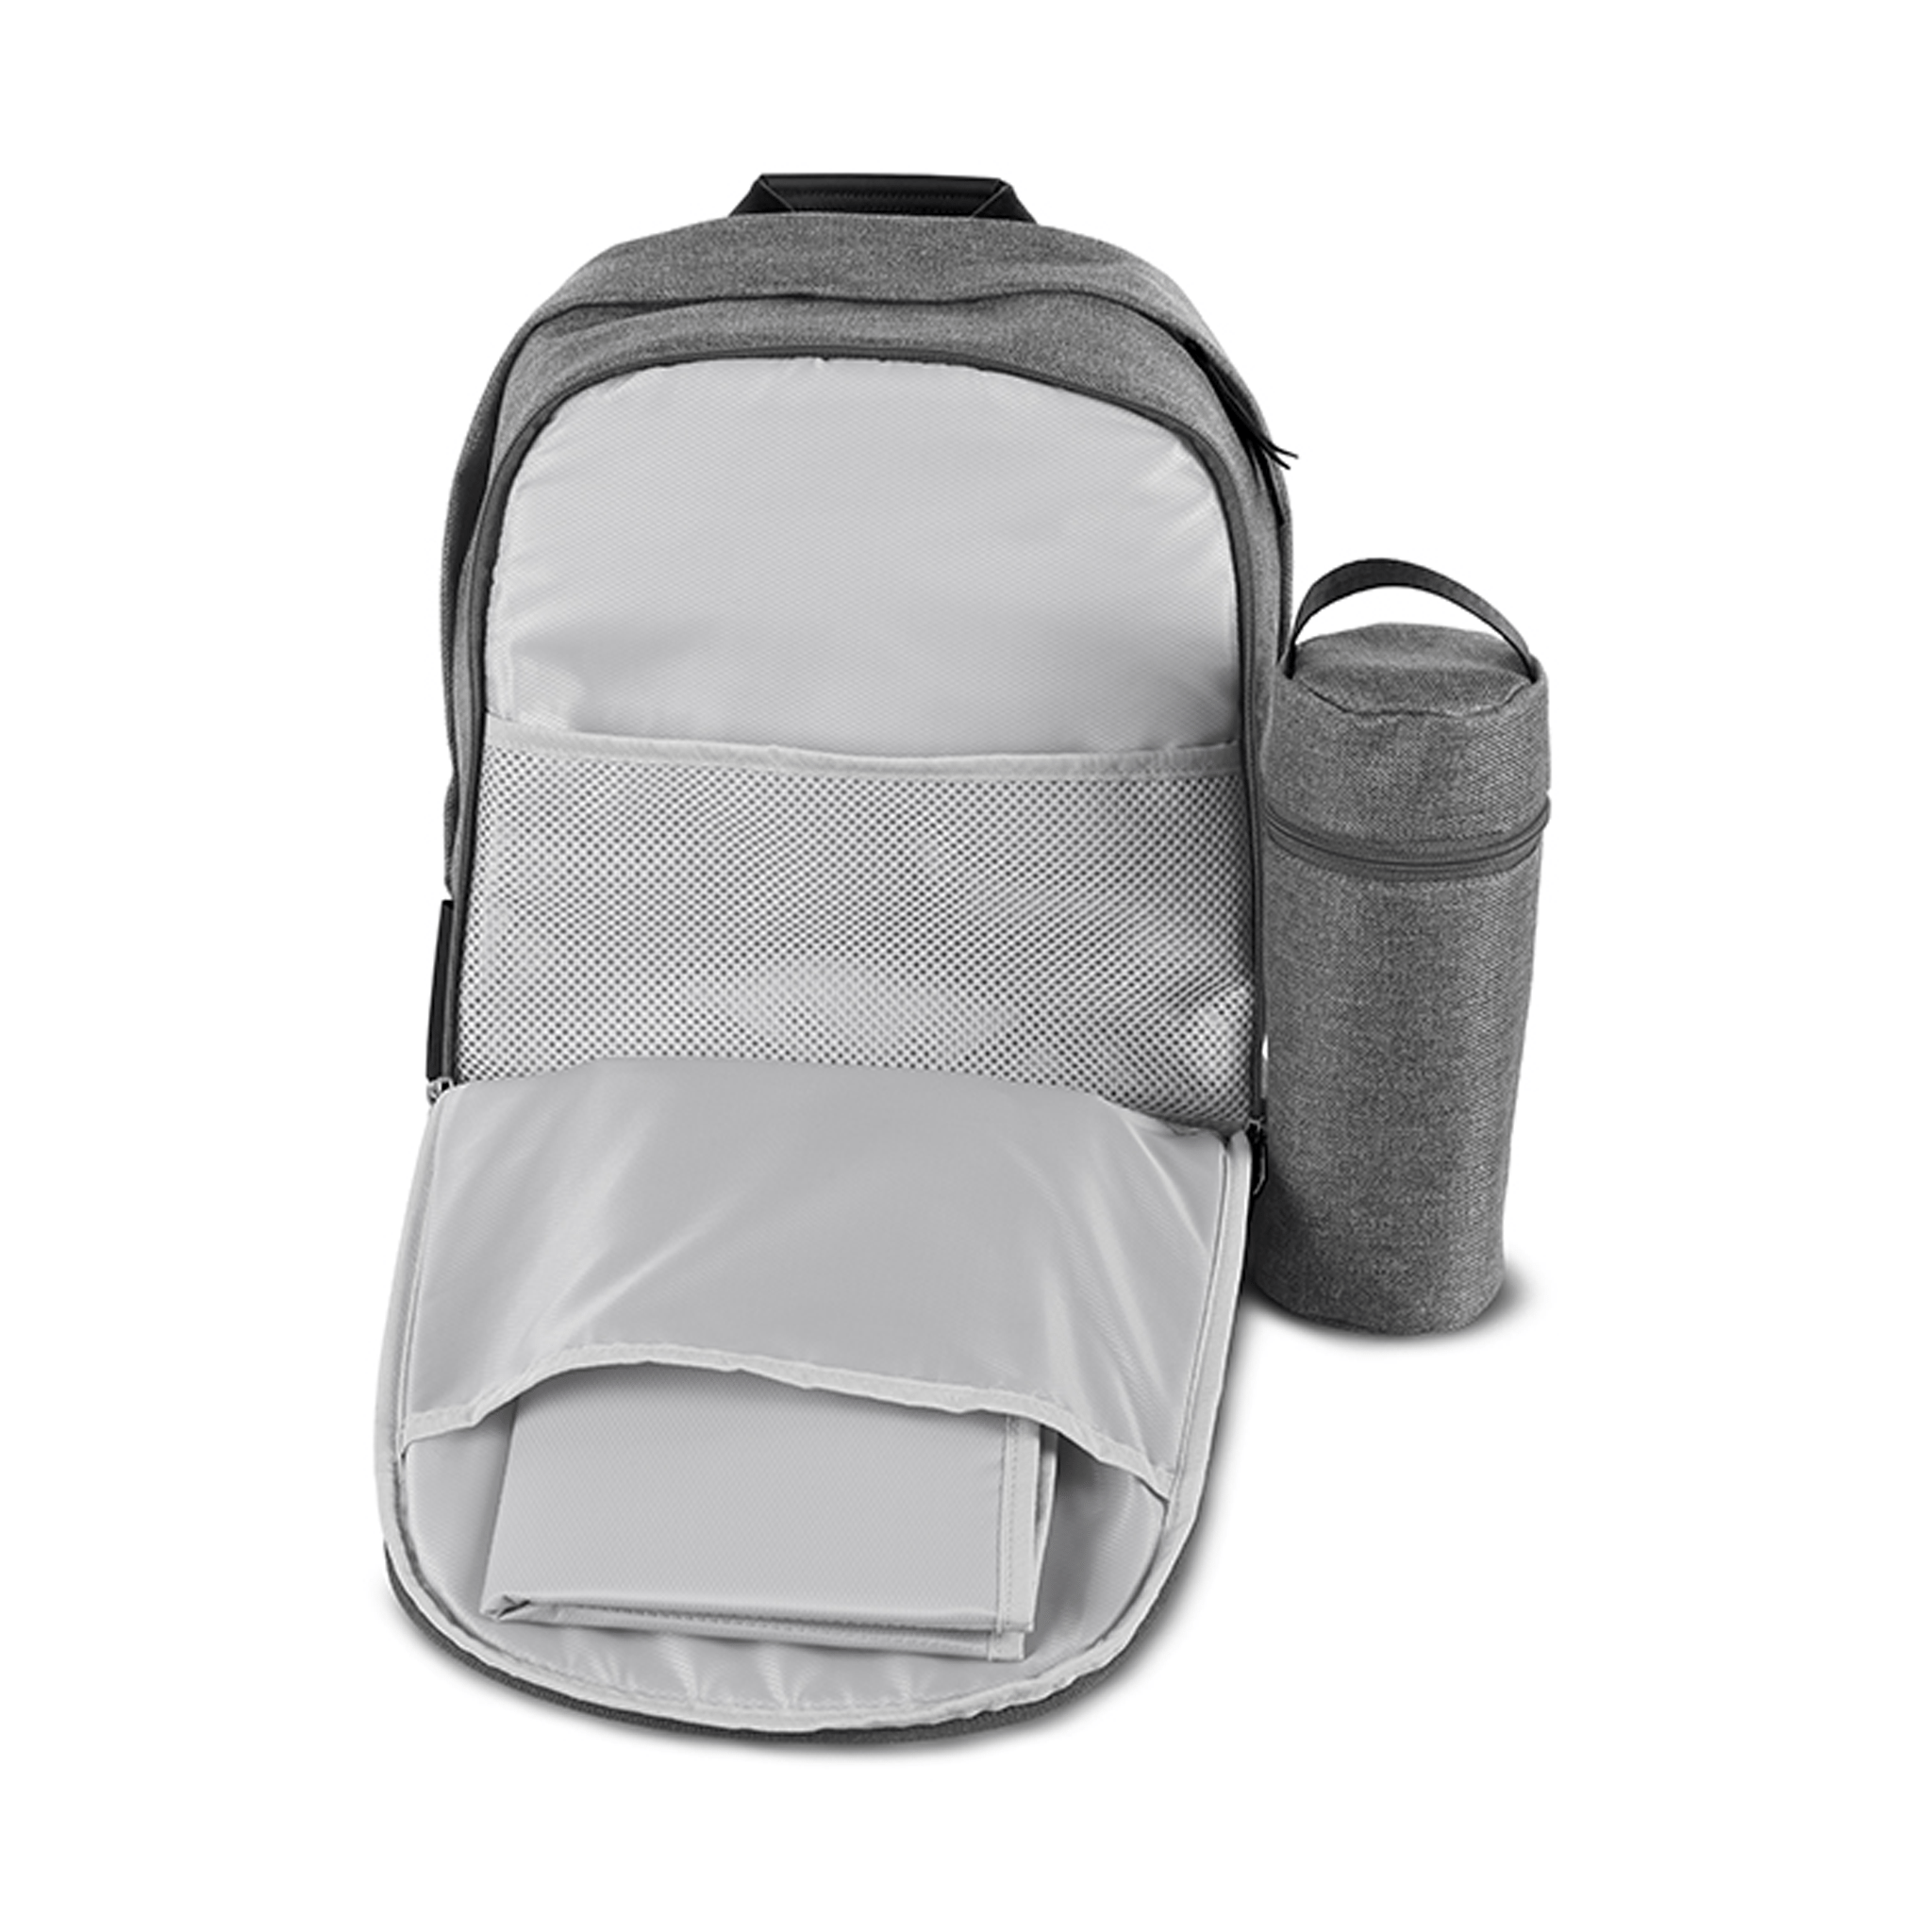 Uppababy changing bags UPPAbaby Changing Backpack Jordan 0919-dpb-ww-jor